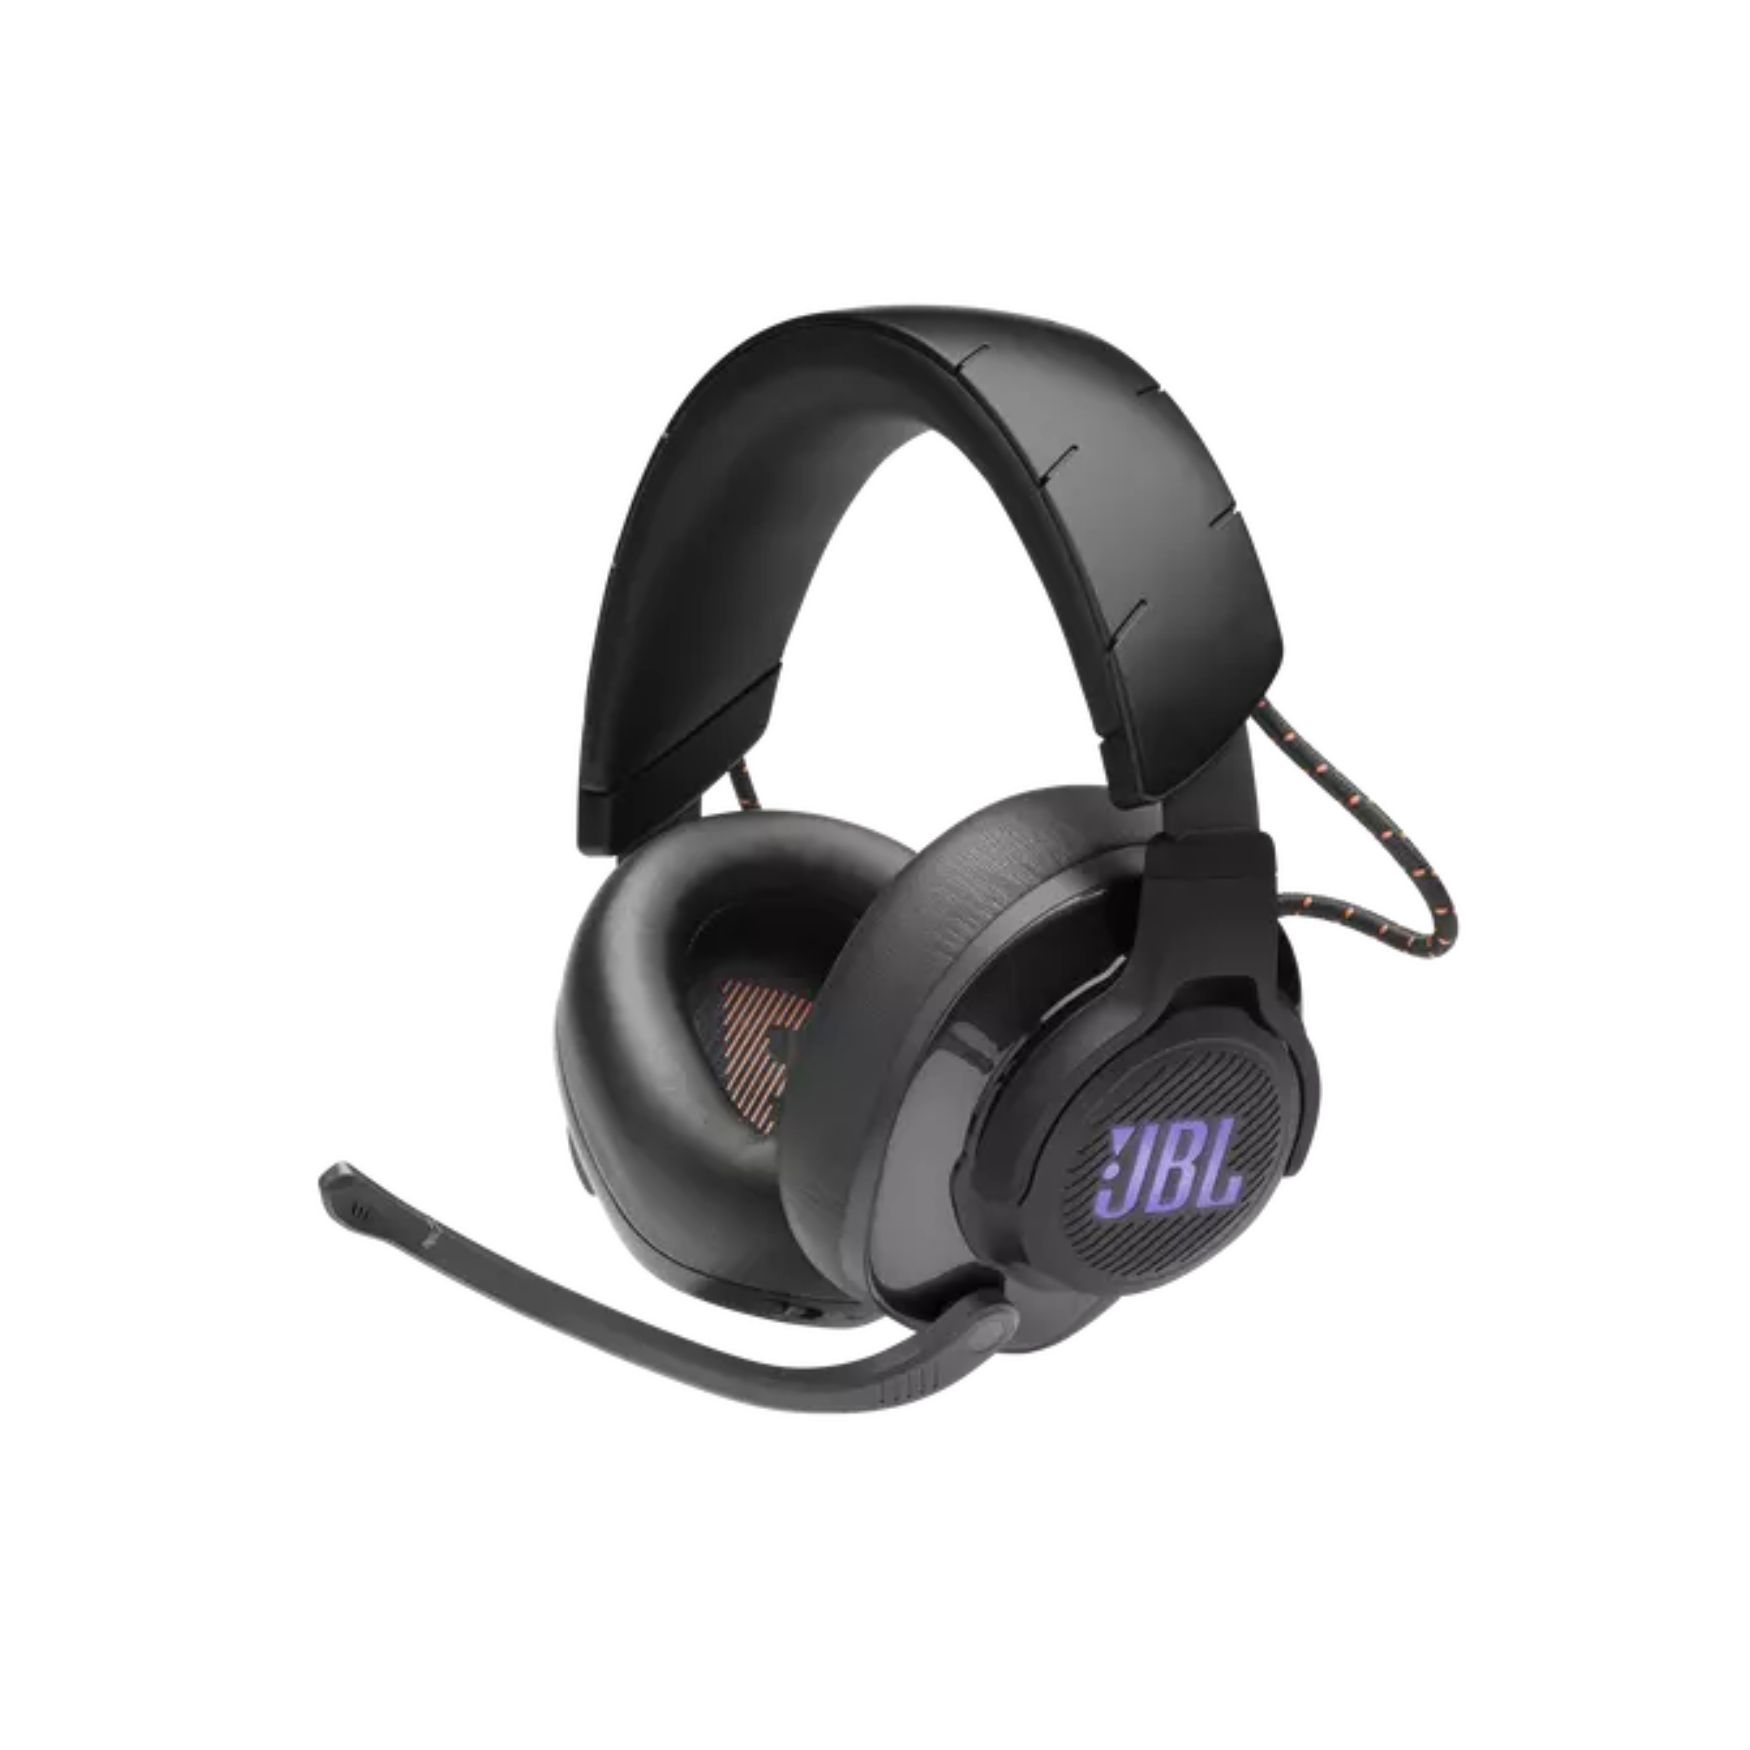 JBL Quantum 600 Wireless Over-Ear Surround Sound Gaming Headset